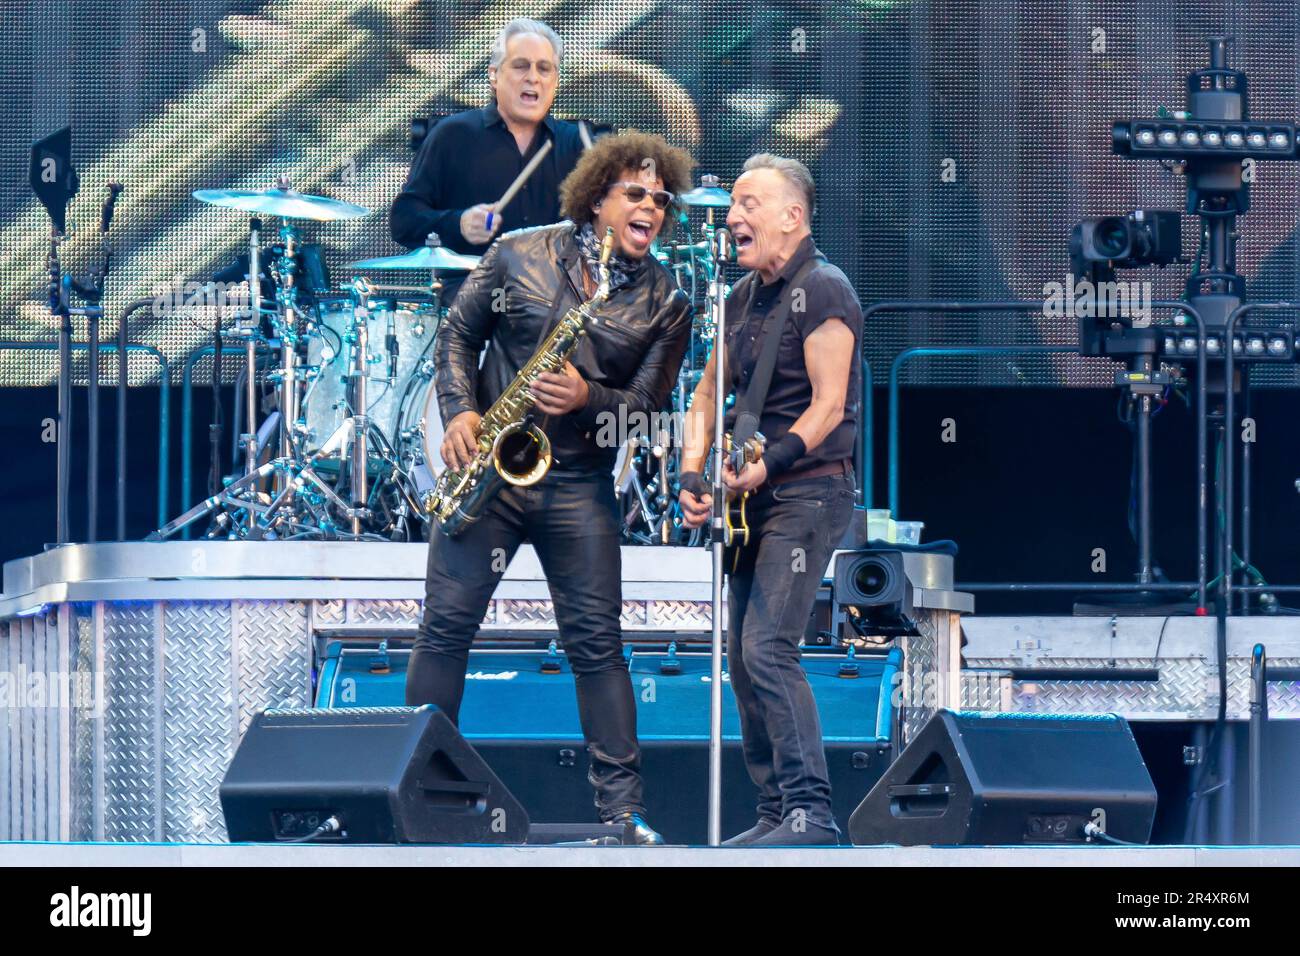 Edinburgh, Scotland. 30th May 2023. Bruce Springsteen and the E Street Band play Murrayfield Stadium on the first UK show of his current World Tour. Bruce and Jake Clemons duet a chorus in front of the 65,000 capacity crowd. Credit: Tim J. Gray/Alamy Live News Stock Photo